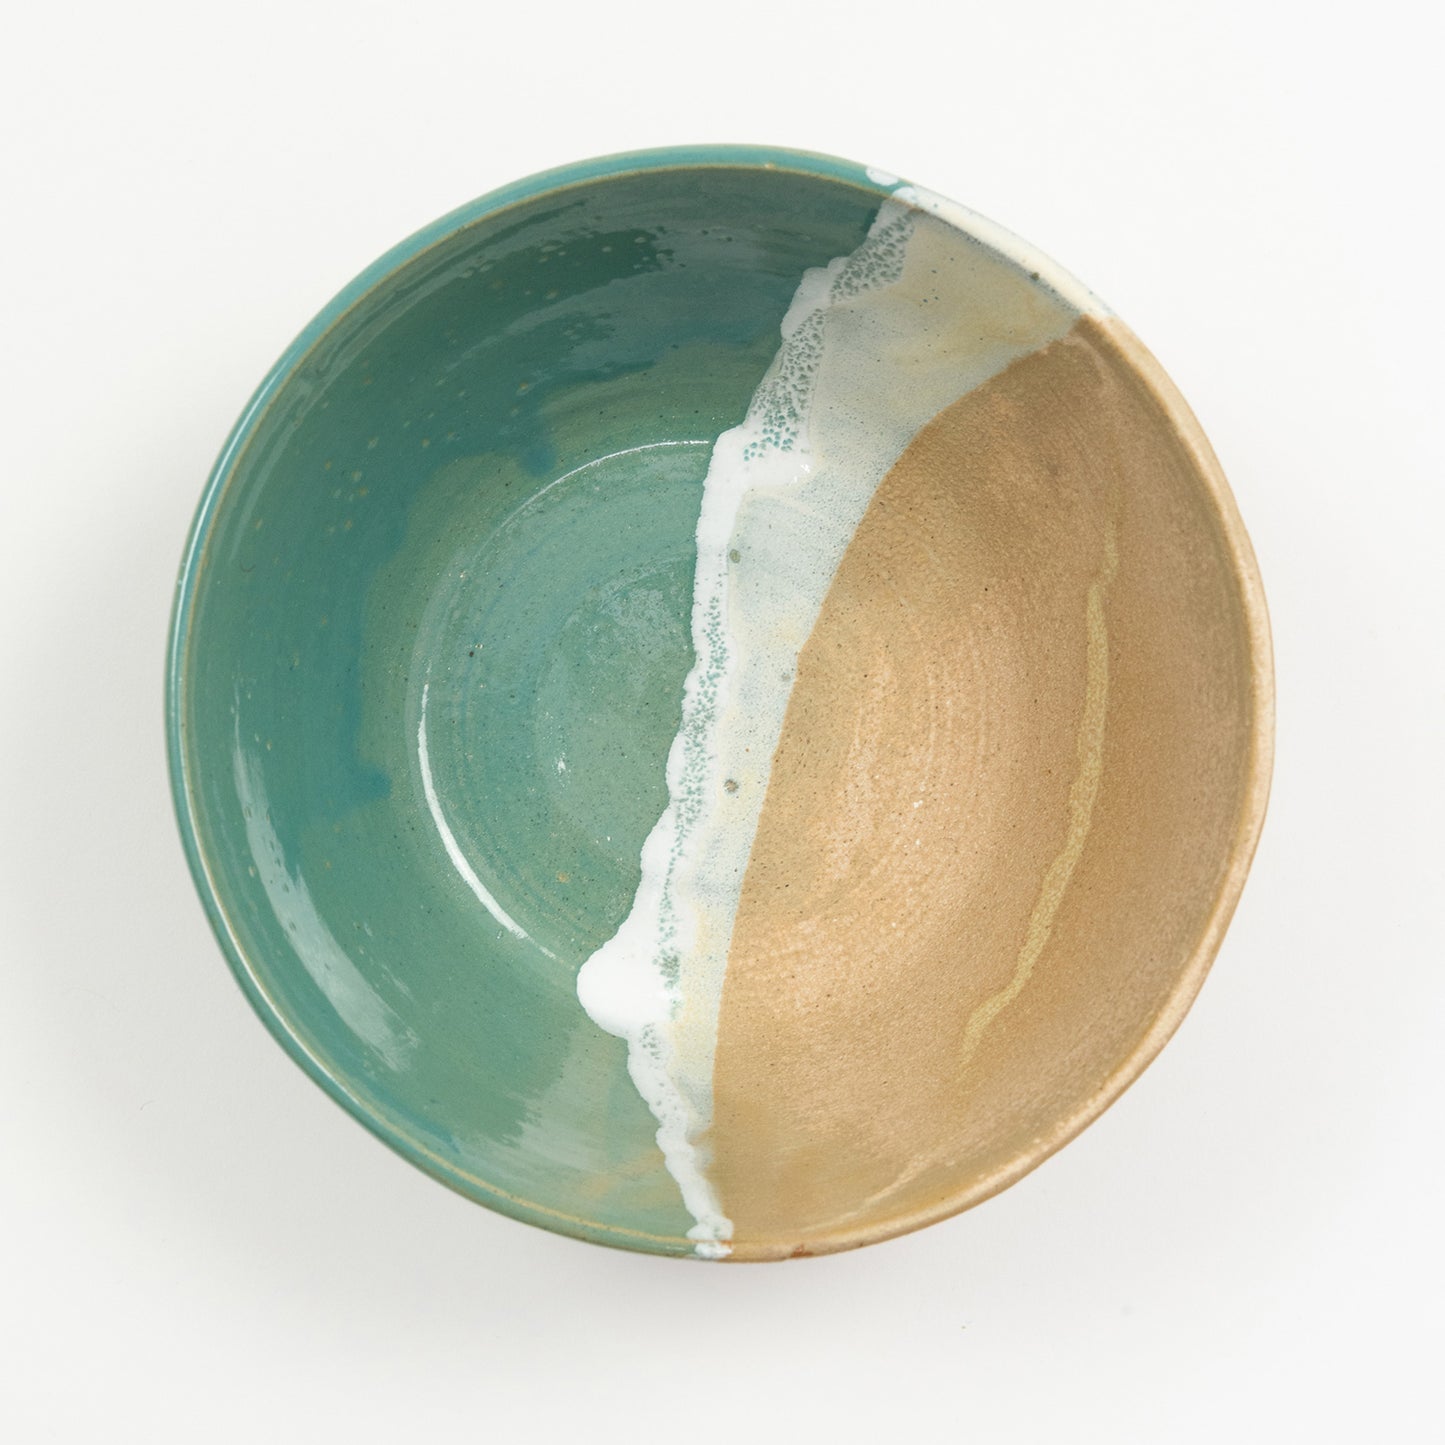 A bowl pictured on a white background. The bowl has an ocean shoreline design, with the sea, a wave, and the sand across it.